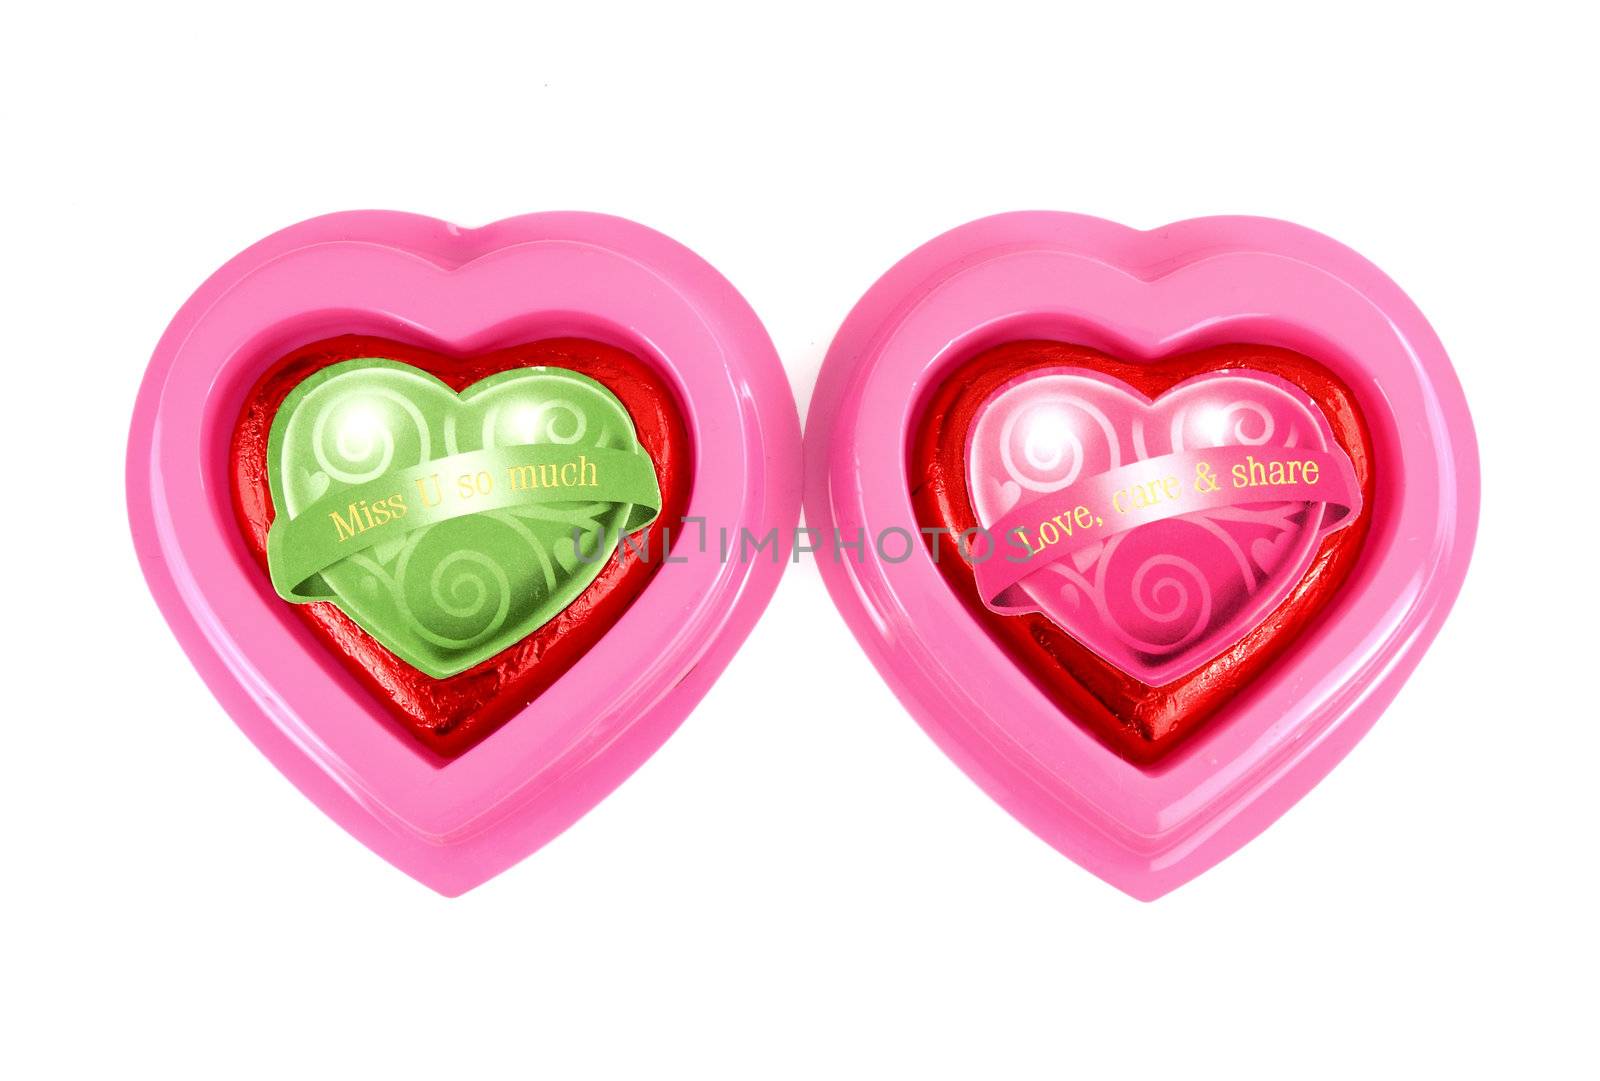 Wrapped red chocolate hearts on white background by geargodz